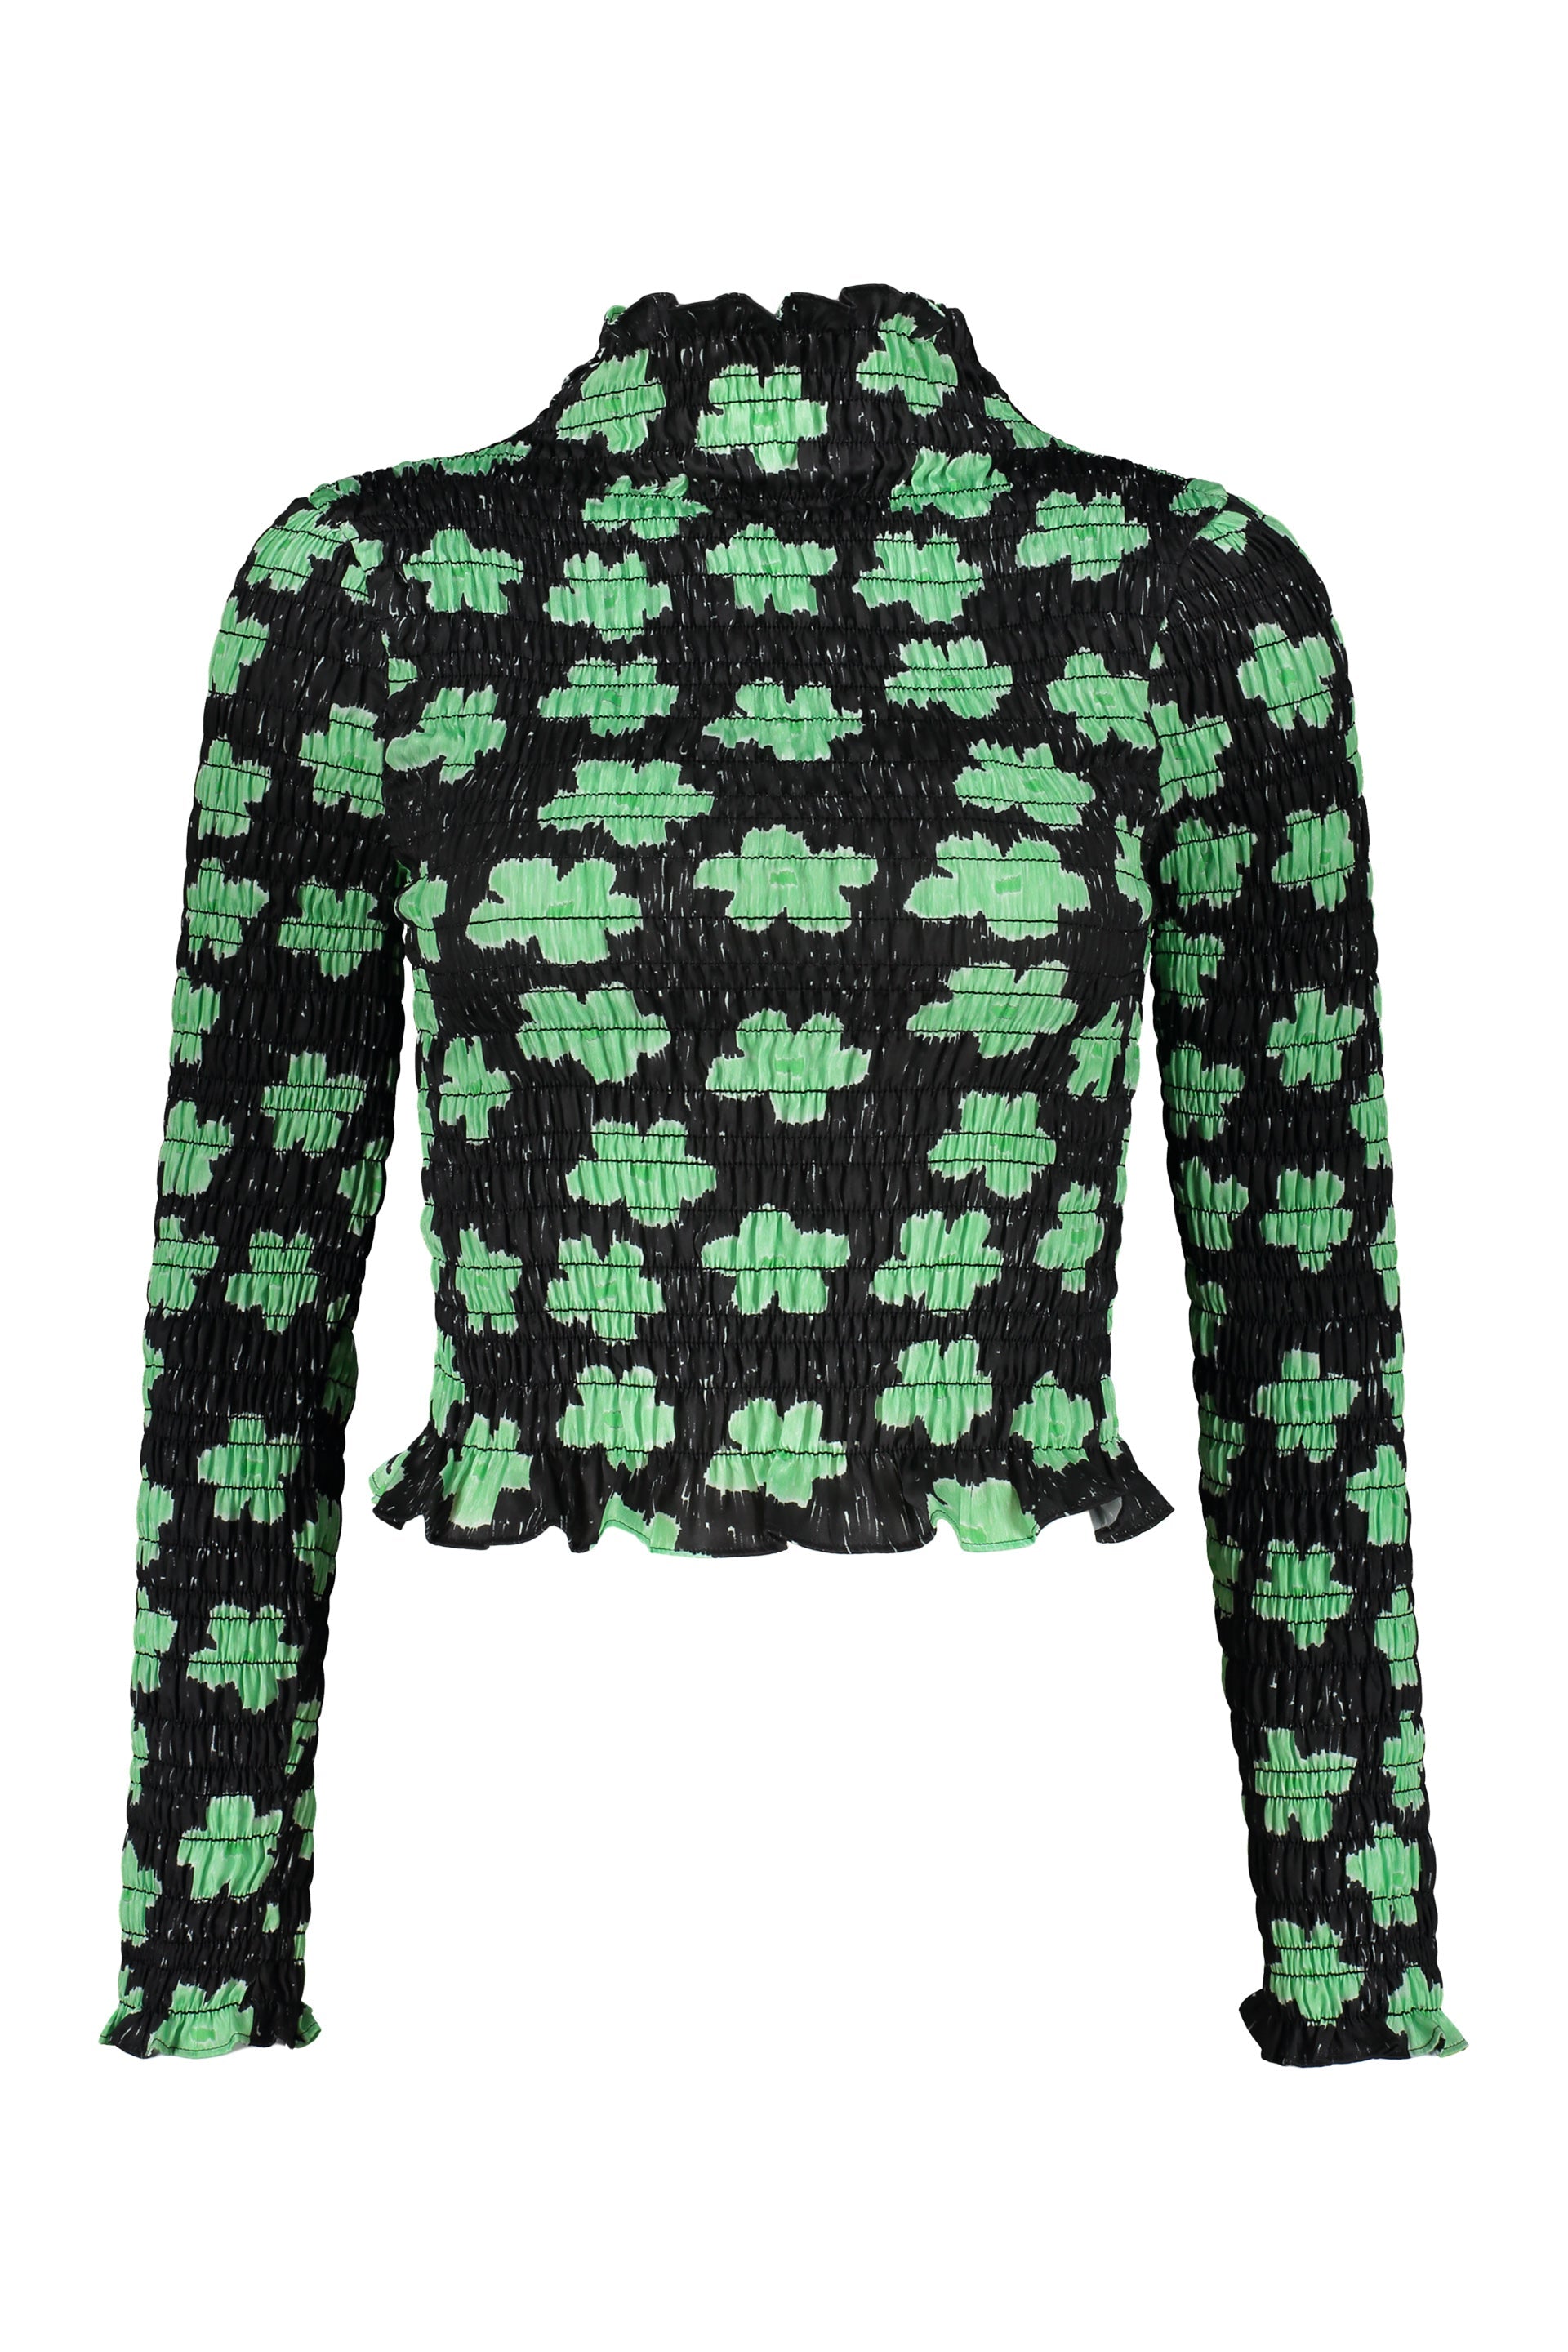 Amy-Crookes-OUTLET-SALE-Printed-long-sleeve-top-Shirts-XSS-ARCHIVE-COLLECTION_43123fcd-9309-4383-80f5-c6b698707b01.jpg